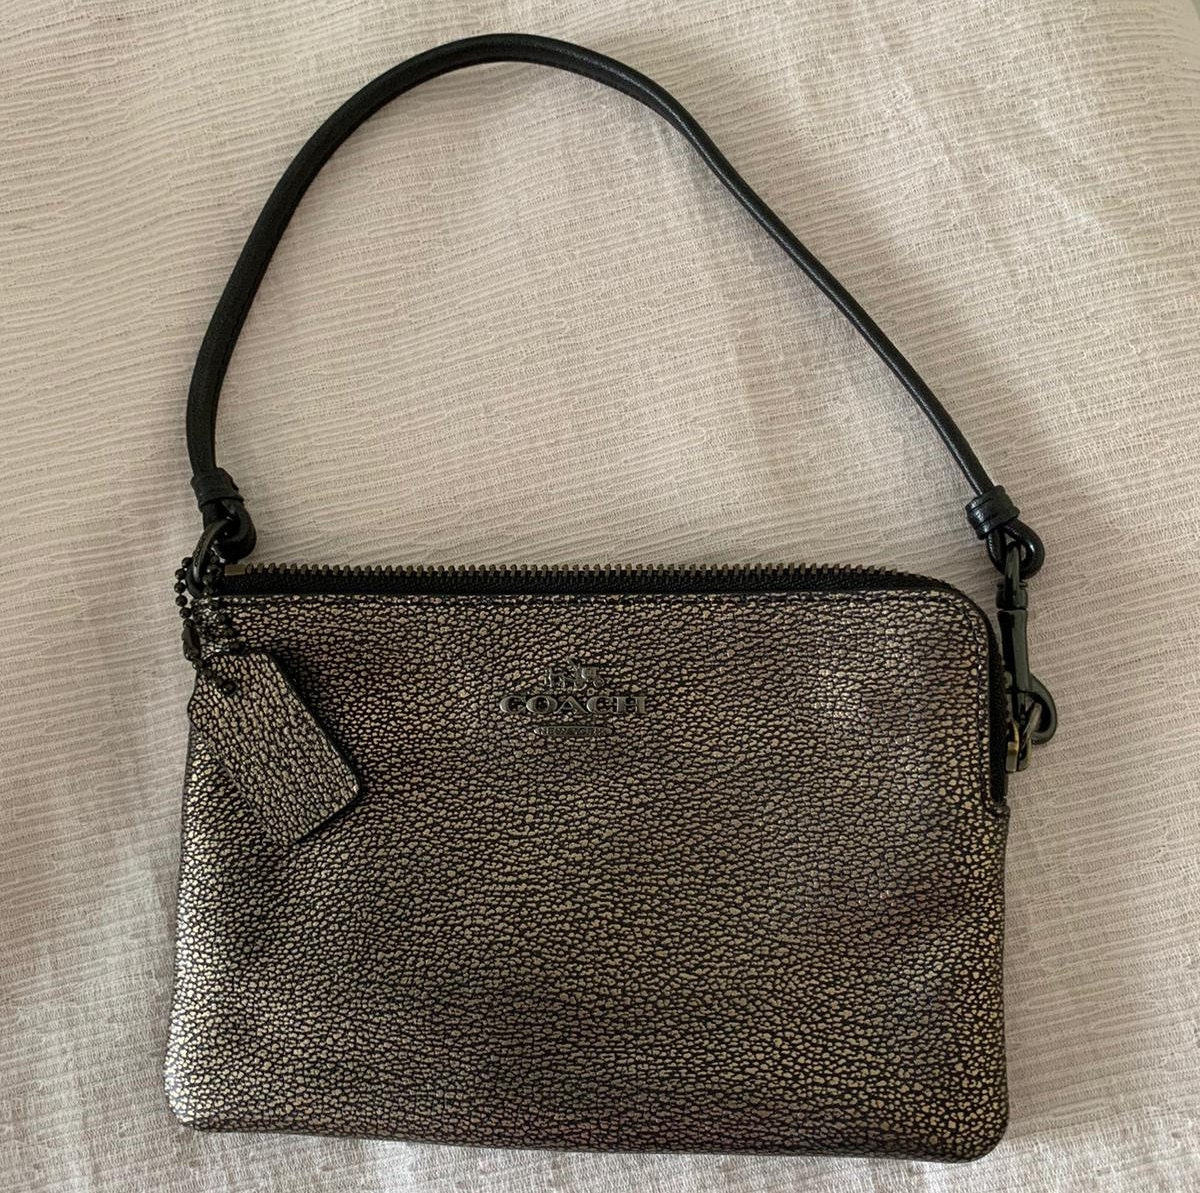 I've been collecting Coach bags from thrift and secondhand stores